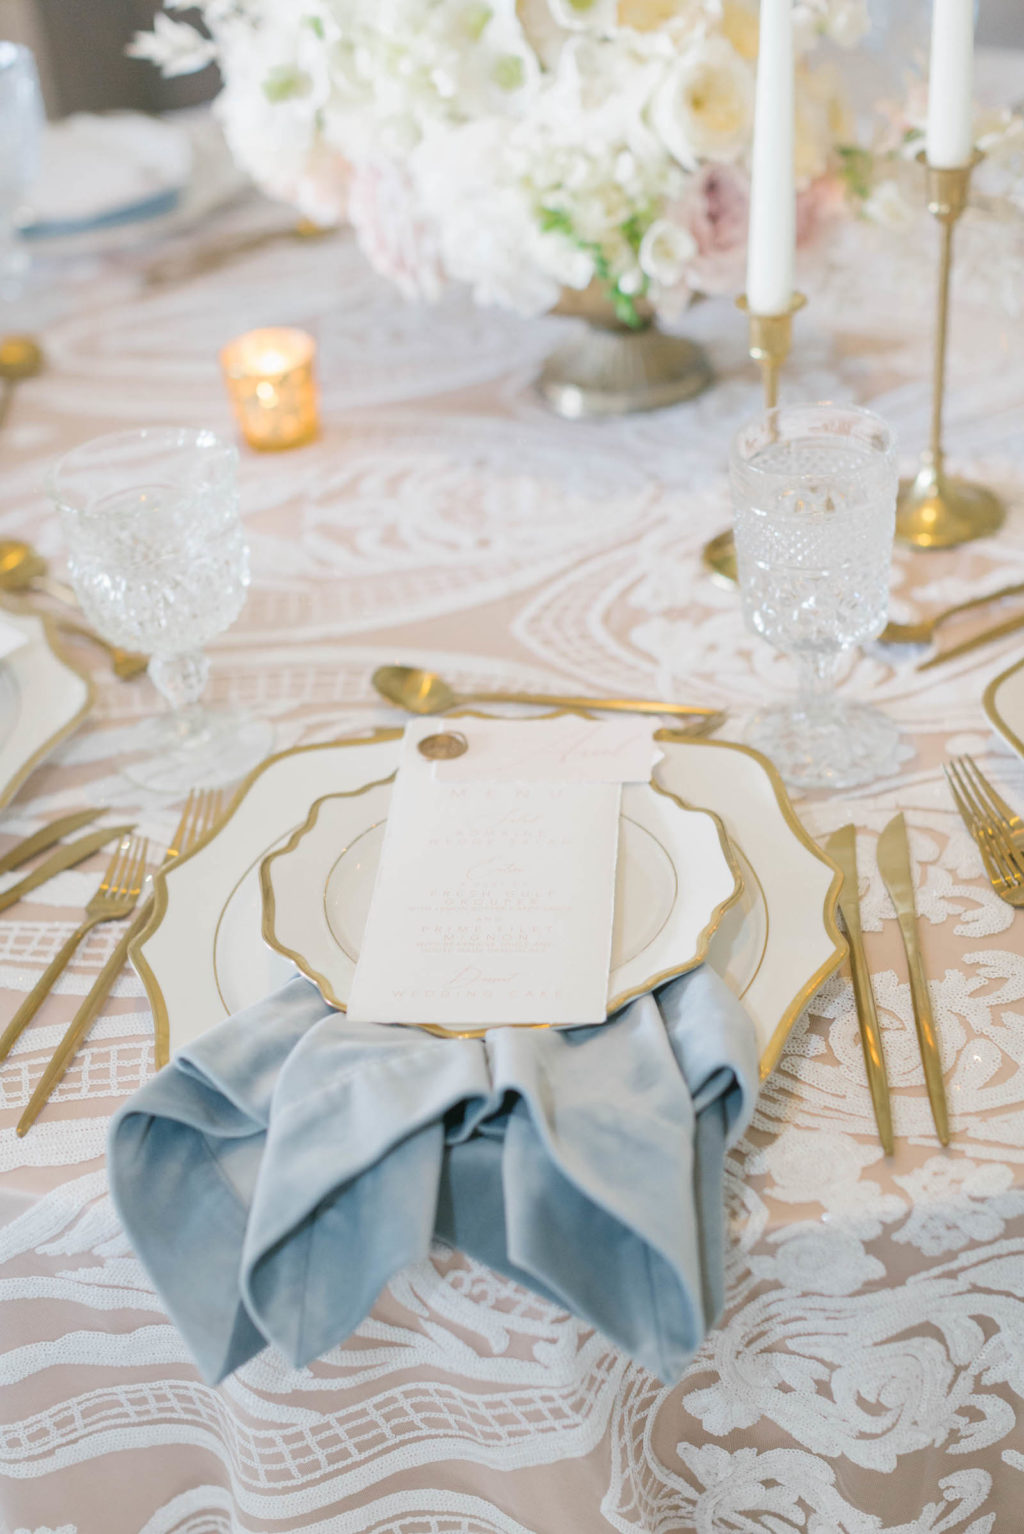 Classic Modern Wedding Reception Decor, Scalloped White and Gold China Plates, Gold Flatware and Candlesticks, Lace Table Linen and Blush Underlay | Tampa Wedding Rentals Kate Ryan Event Rentals | Wedding Planner Parties A'la Carte